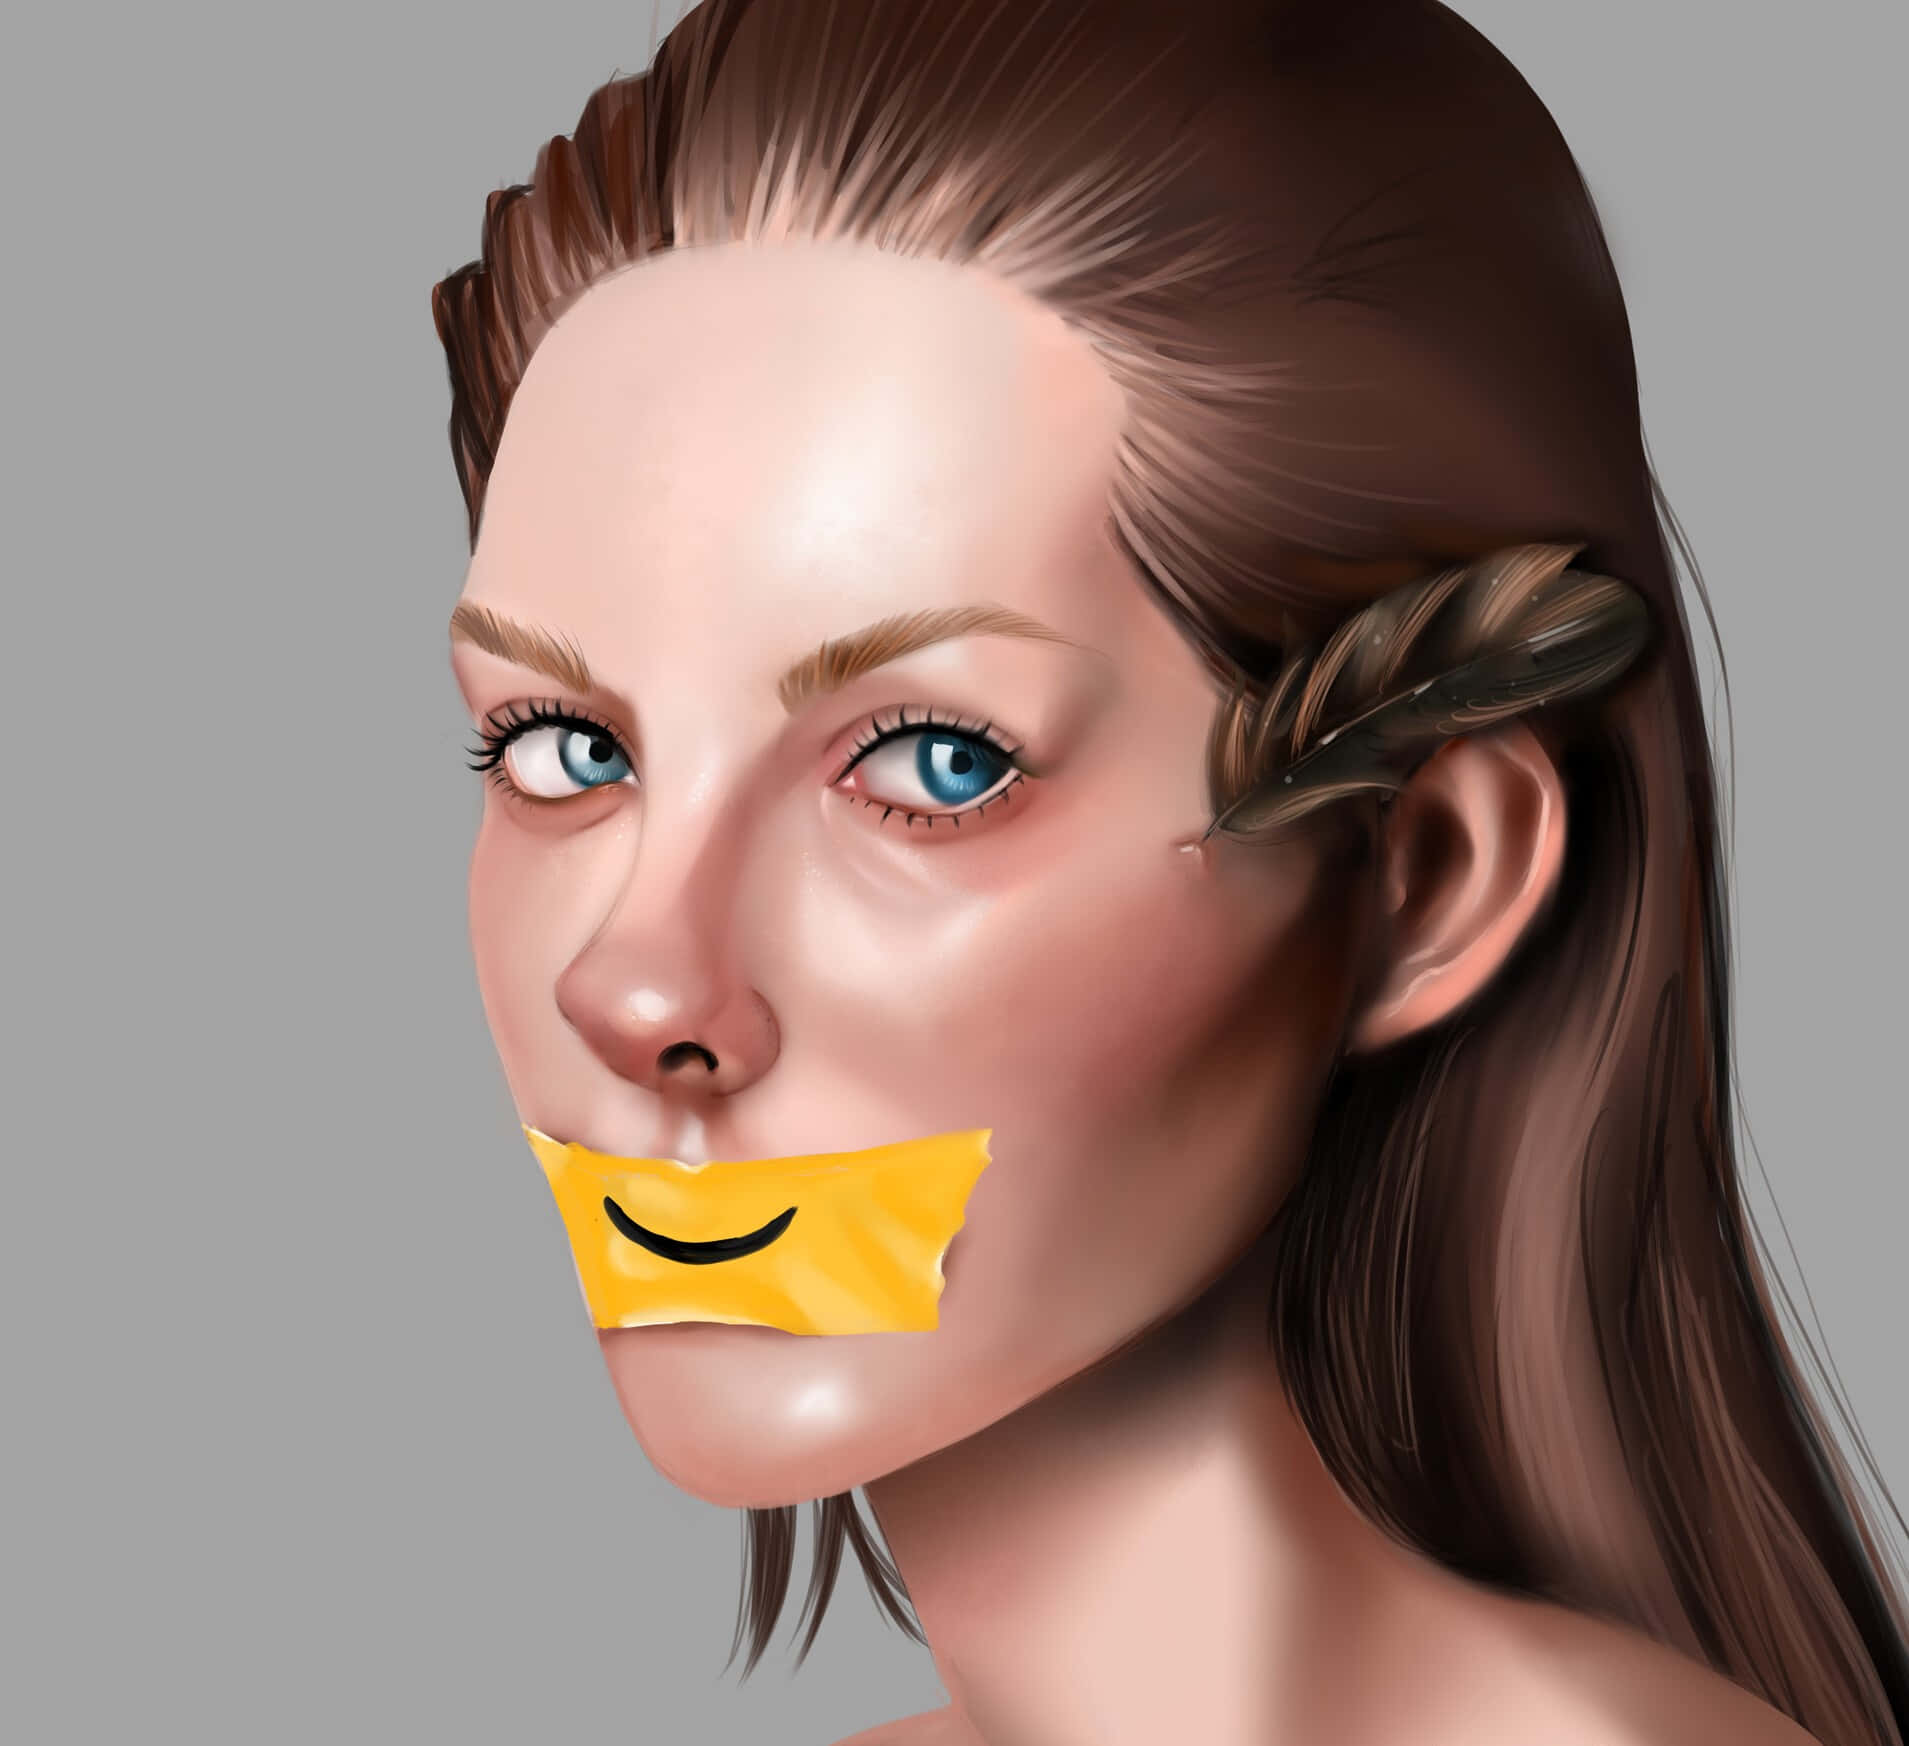 A Woman With A Yellow Tape On Her Mouth